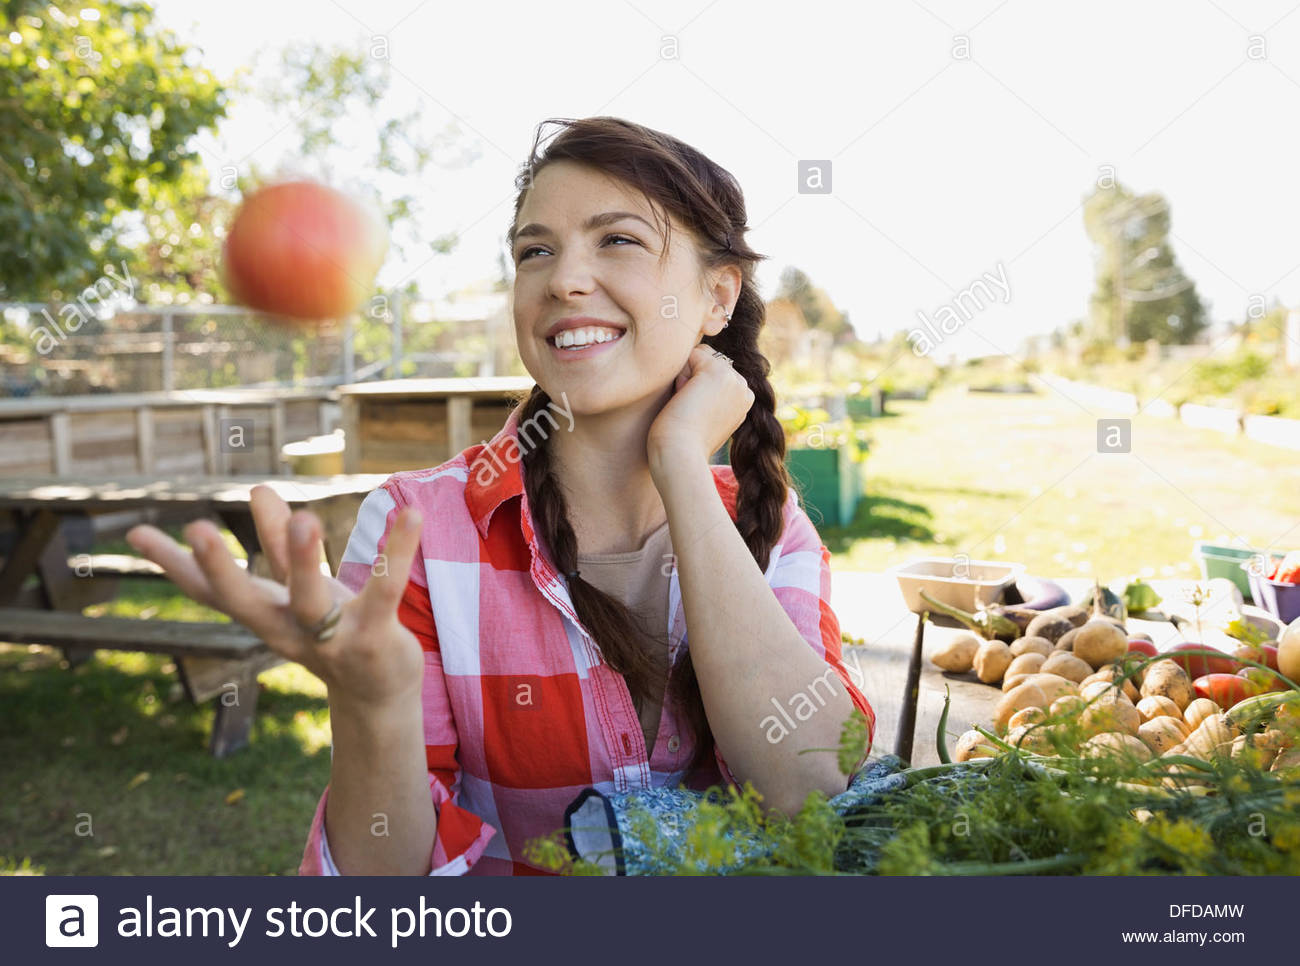 Playful woman tossing apple in community garden Stock Photo